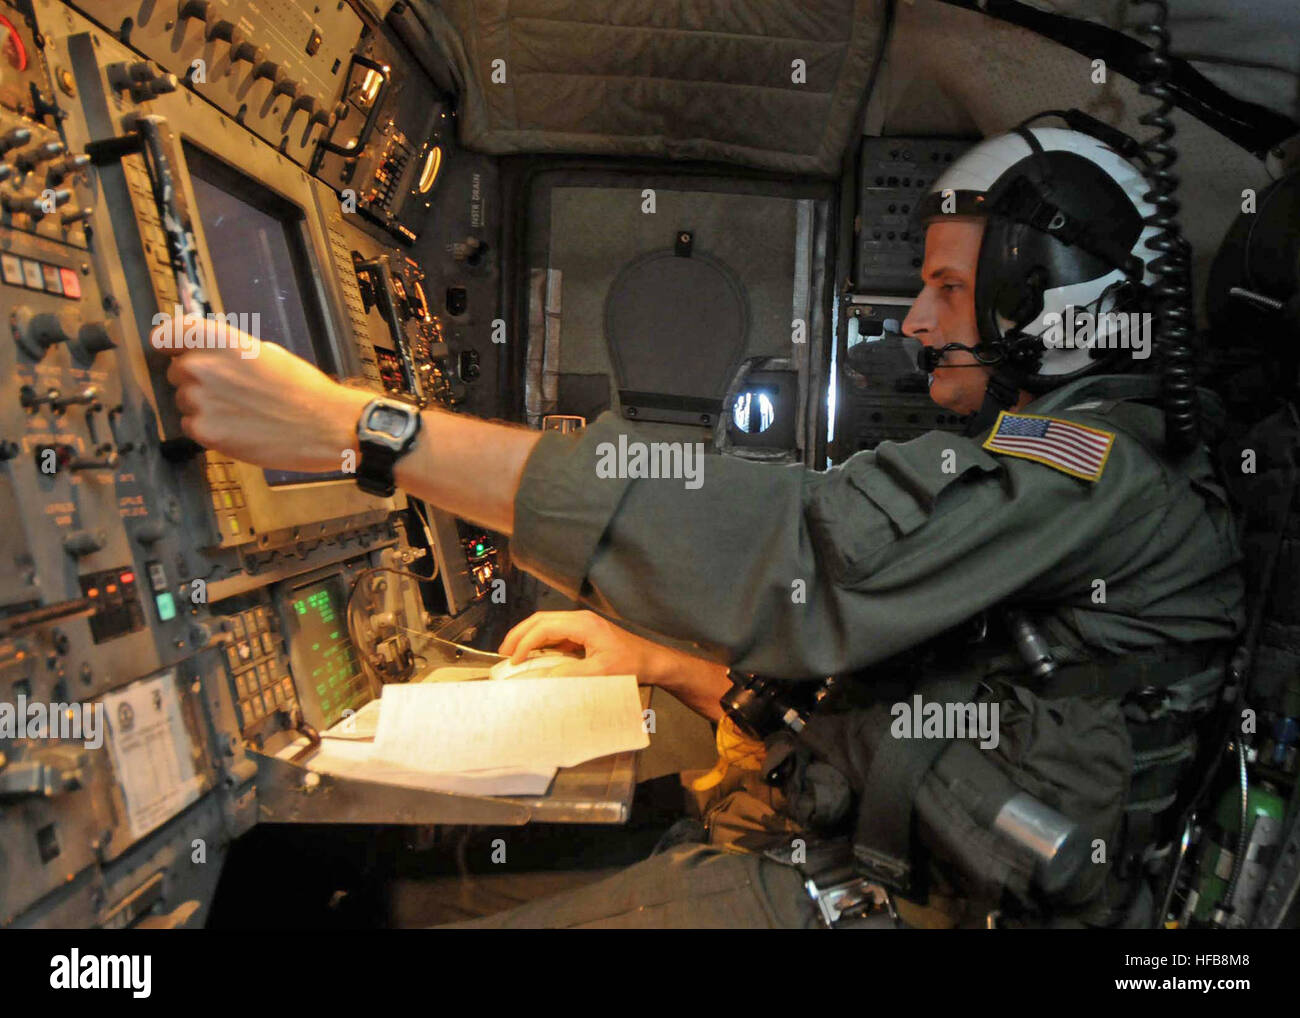 081111-N-9565D-010  PACIFIC OCEAN (Nov. 11, 2008) Lt. Brett Whorley, from Airborne Early Warning Squadron (VAW) 115, the 'Liberty Bells', assess possible targets on his radar while conducting airborne early warning and strike group coordination between various Carrier Air Wing (CVW) 5 squadrons assigned to the aircraft carrier USS George Washington (CVN 73). (U.S. Navy photo by Mass Communication Specialist 2nd Class Clifford L. H. Davis/Released) E-2 radar 081111-N-9565D-010 Stock Photo